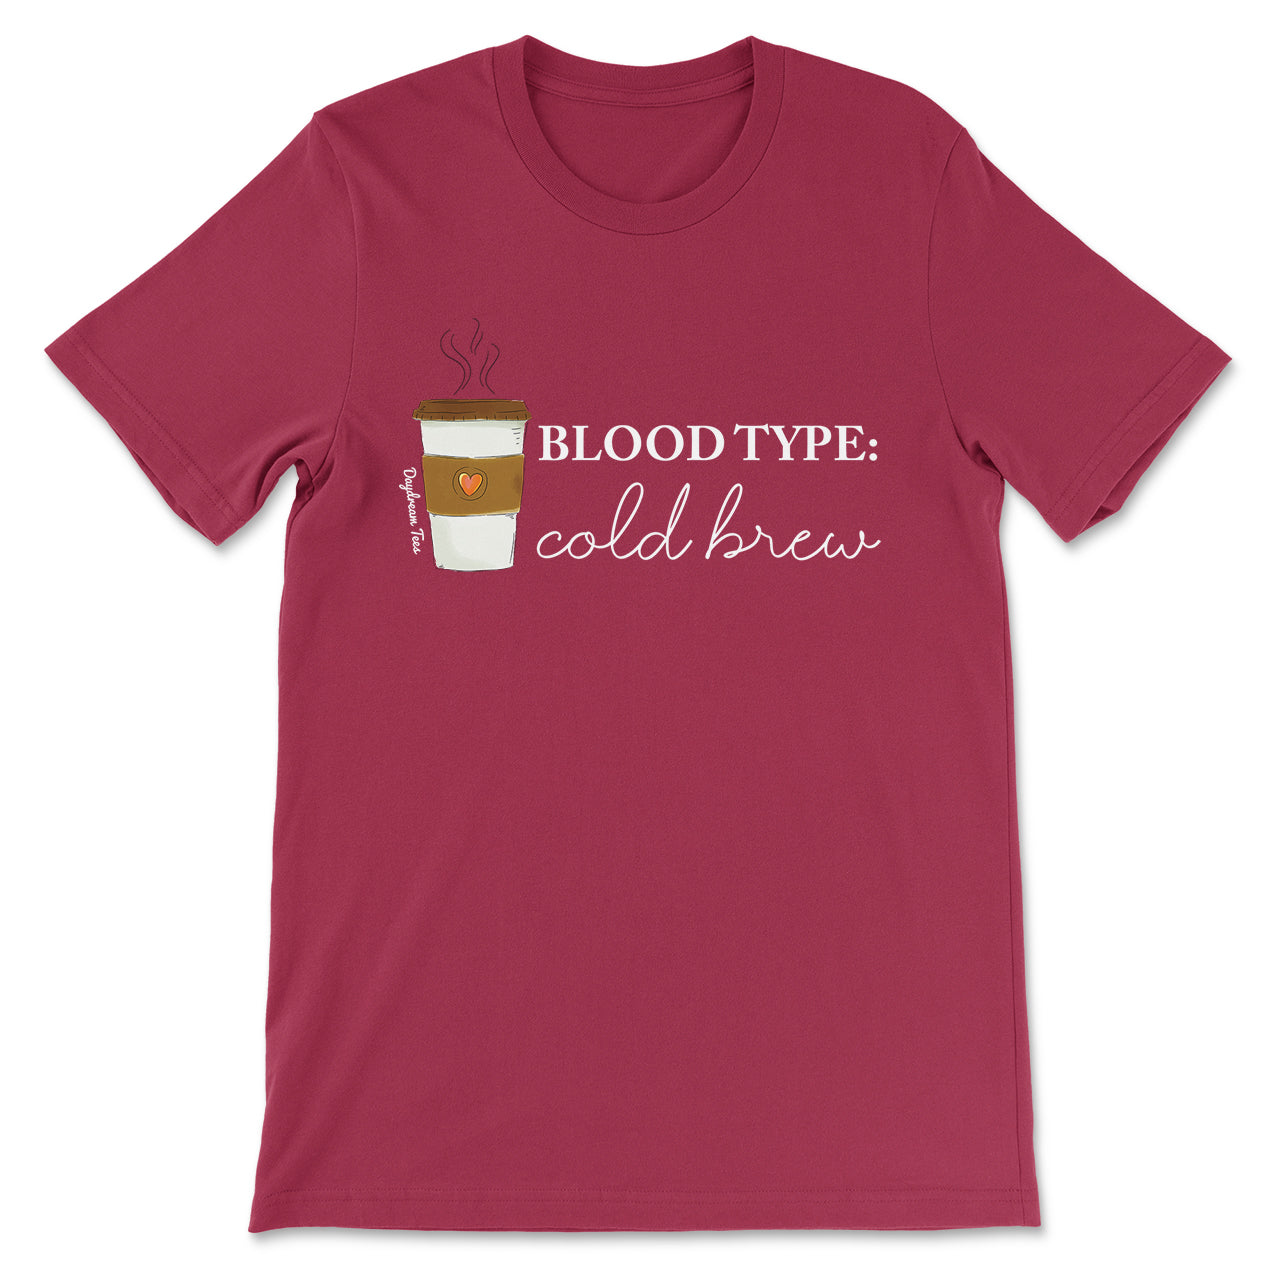 Daydream Tees Blood Type: Cold Brew